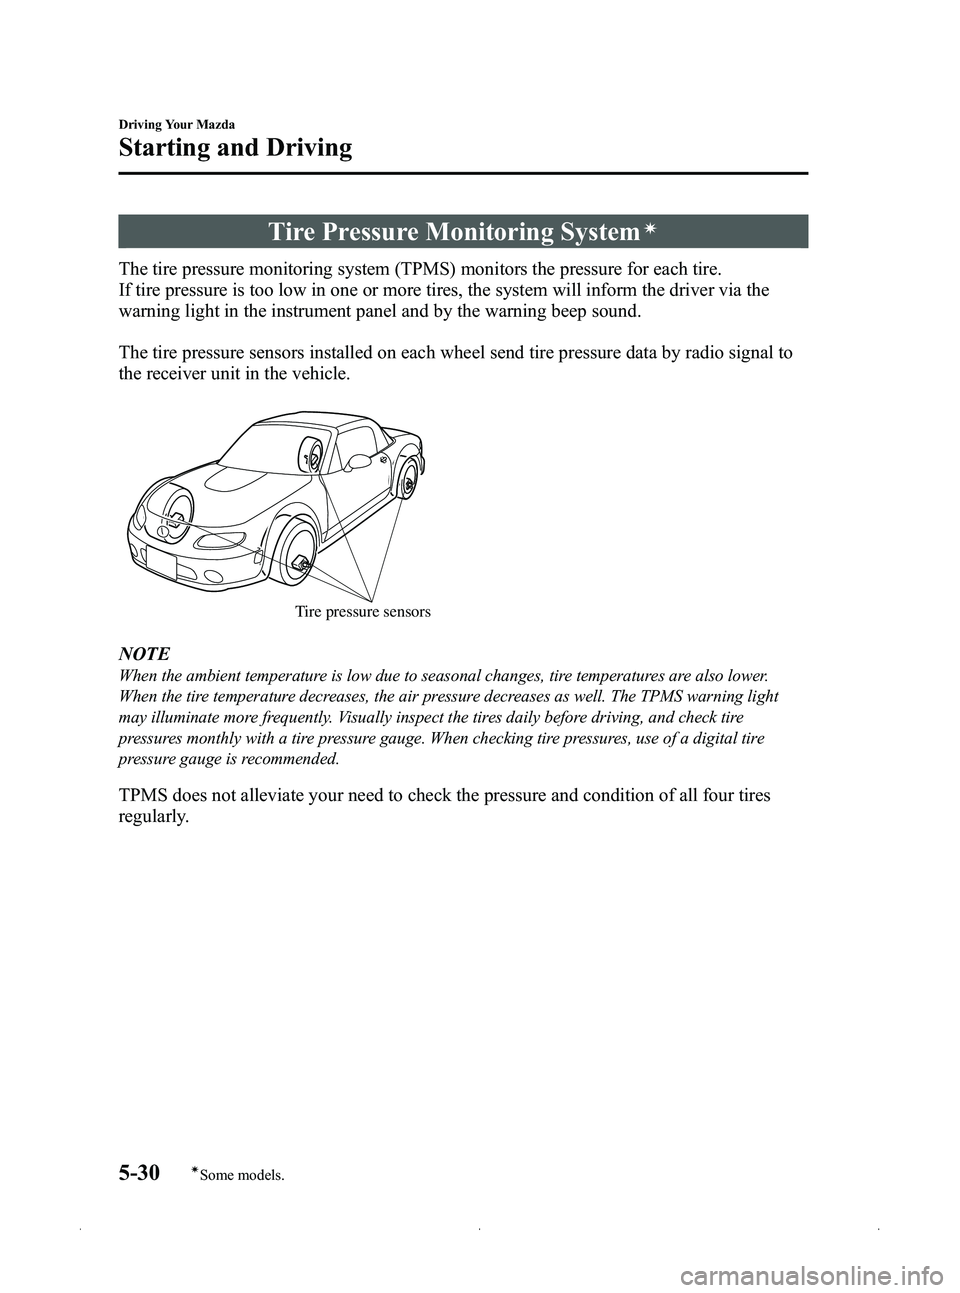 MAZDA MODEL MX-5 MIATA 2012  Owners Manual Black plate (186,1)
Tire Pressure Monitoring Systemí
The tire pressure monitoring system (TPMS) monitors the pressure for each tire.
If tire pressure is too low in one or more tires, the system will 